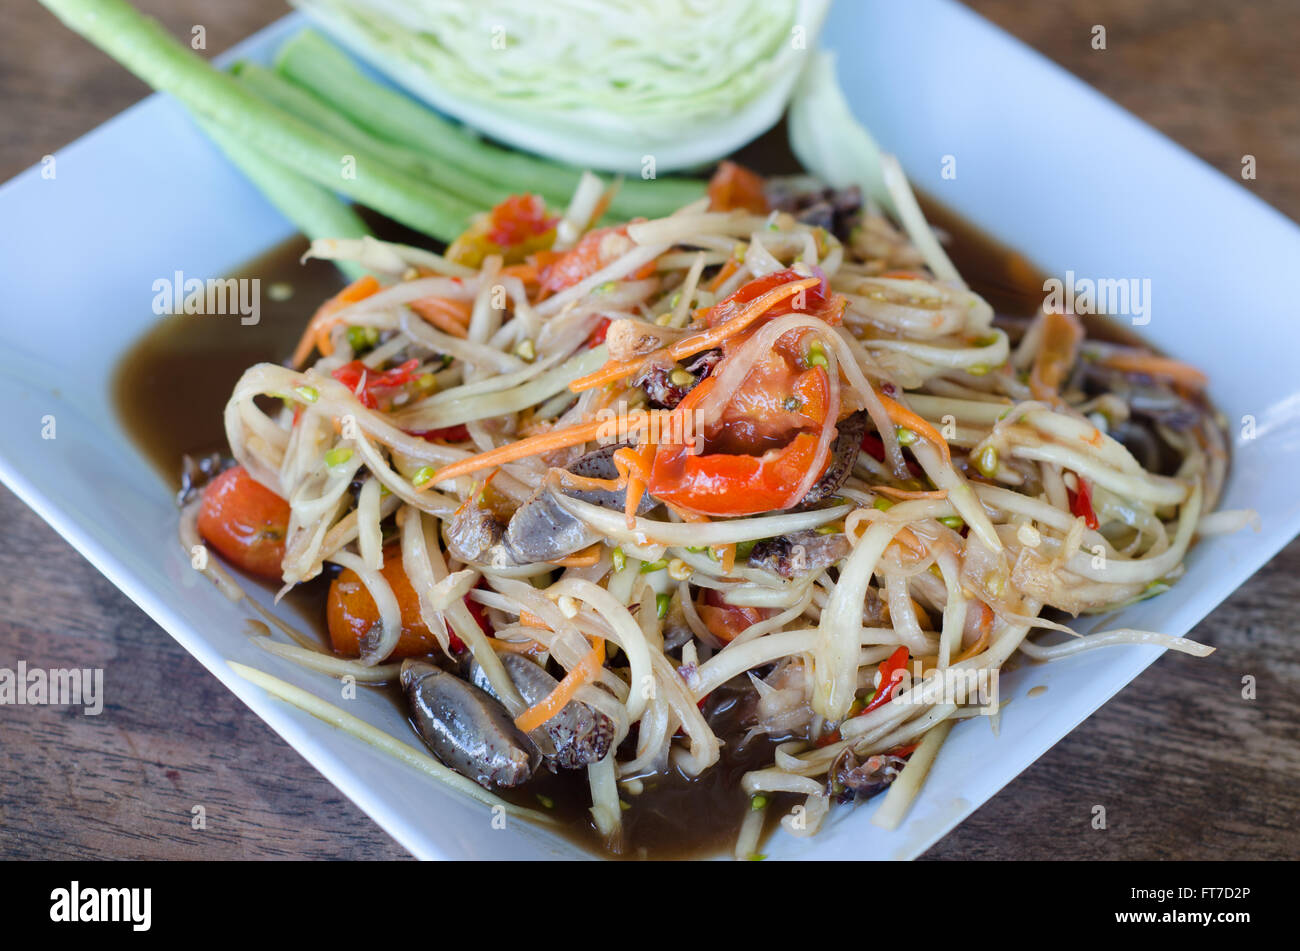 https://c8.alamy.com/comp/FT7D2P/spicy-papaya-salad-with-salted-crab-and-fermented-fish-FT7D2P.jpg